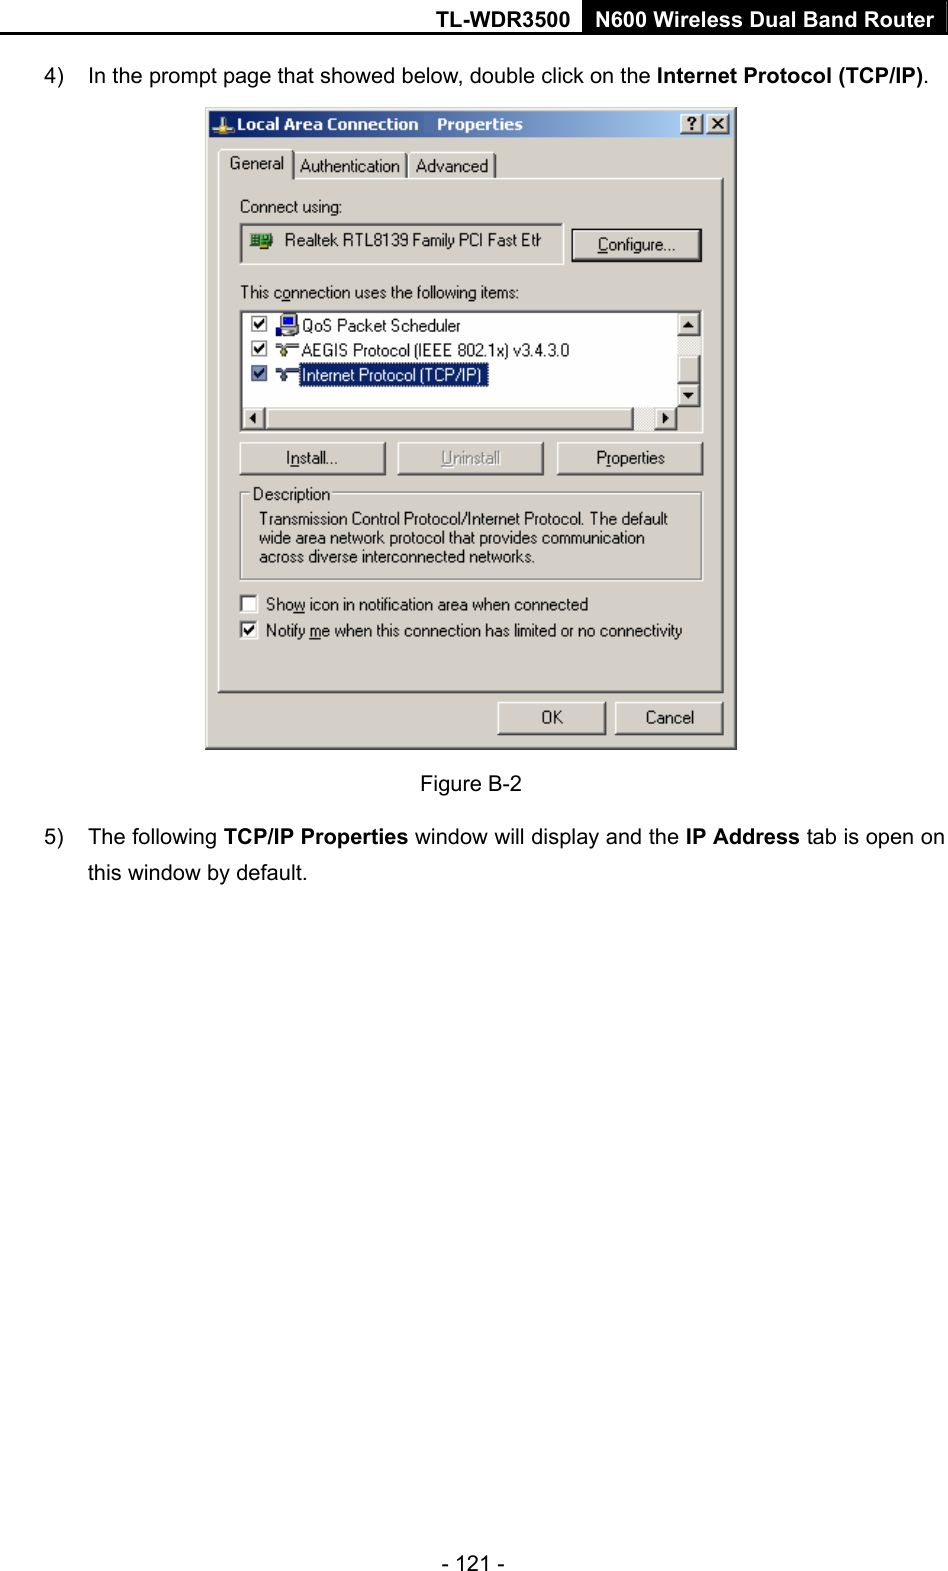 TL-WDR3500 N600 Wireless Dual Band Router - 121 - 4)  In the prompt page that showed below, double click on the Internet Protocol (TCP/IP).  Figure B-2 5) The following TCP/IP Properties window will display and the IP Address tab is open on this window by default. 